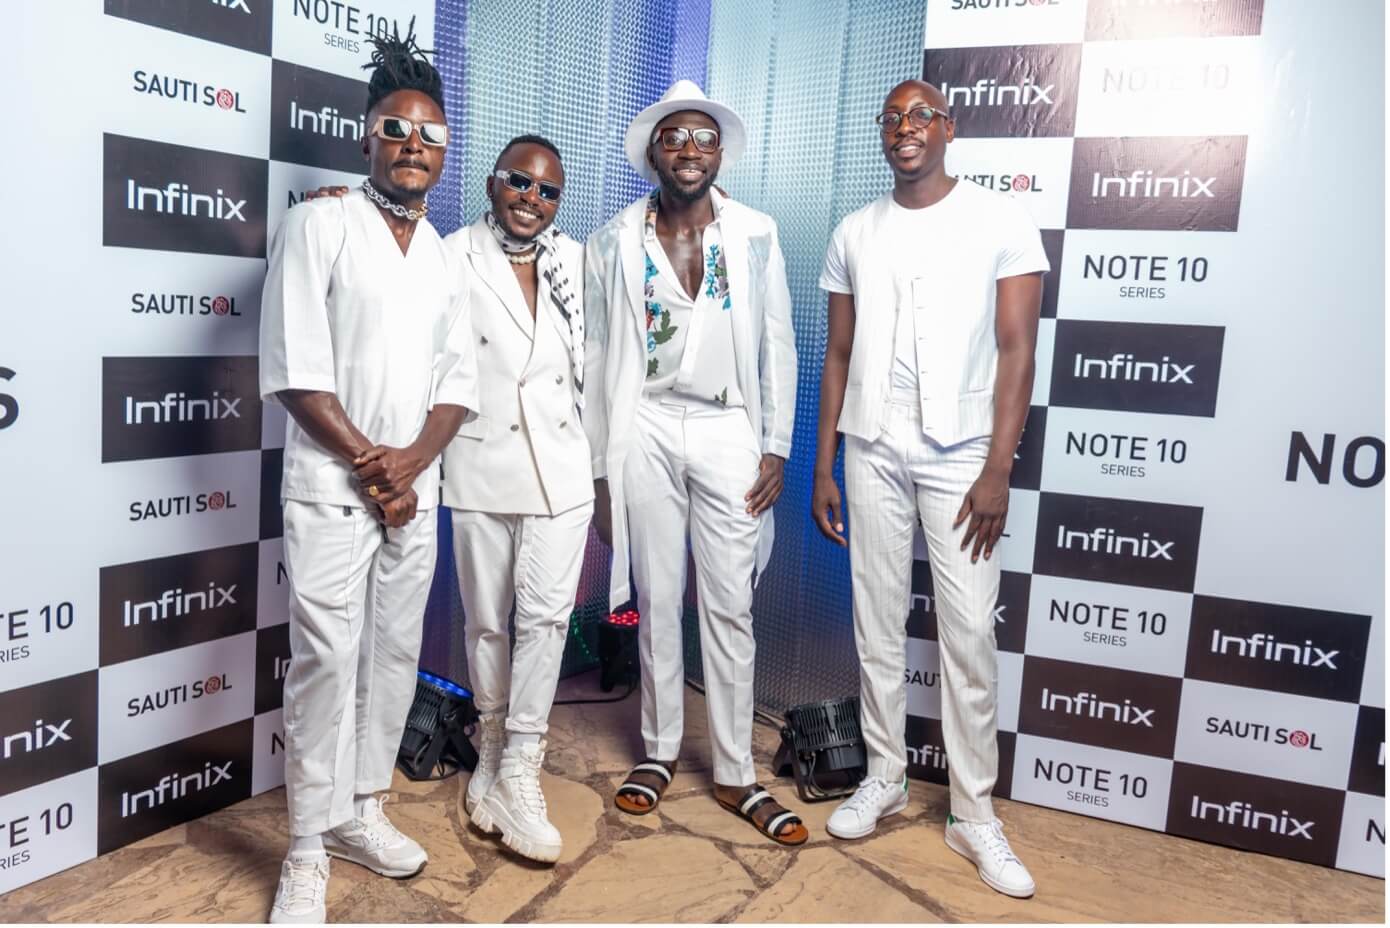 Infinix NOTE 10 Series officially launched in Kenya